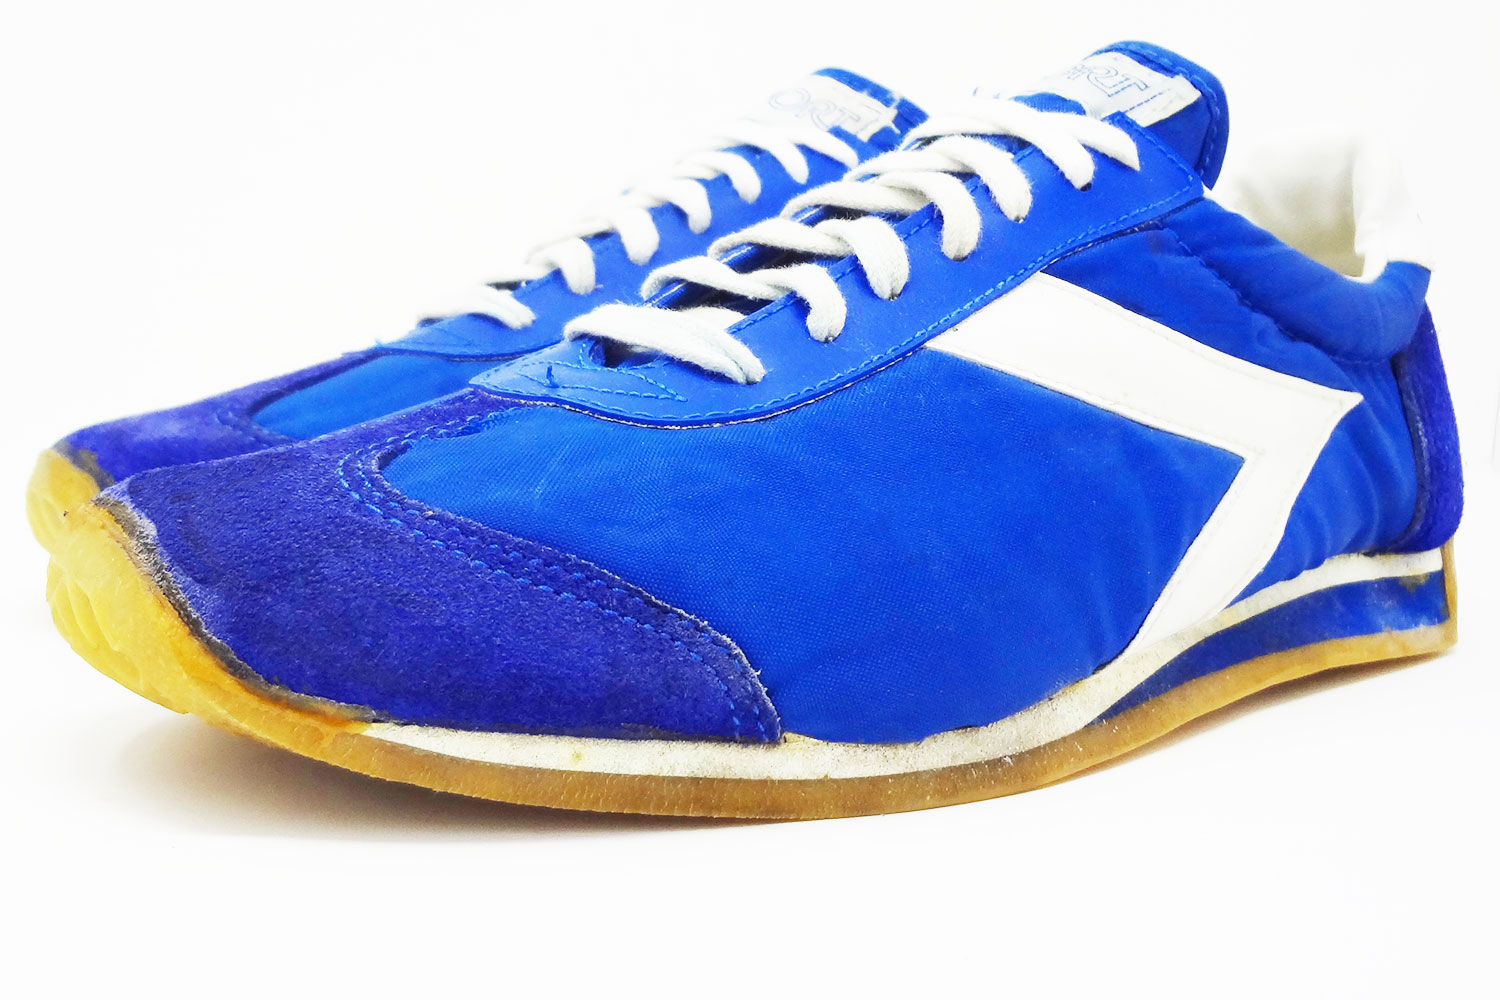 Rare 70s Sport brand vintage sneakers @ The Deffest